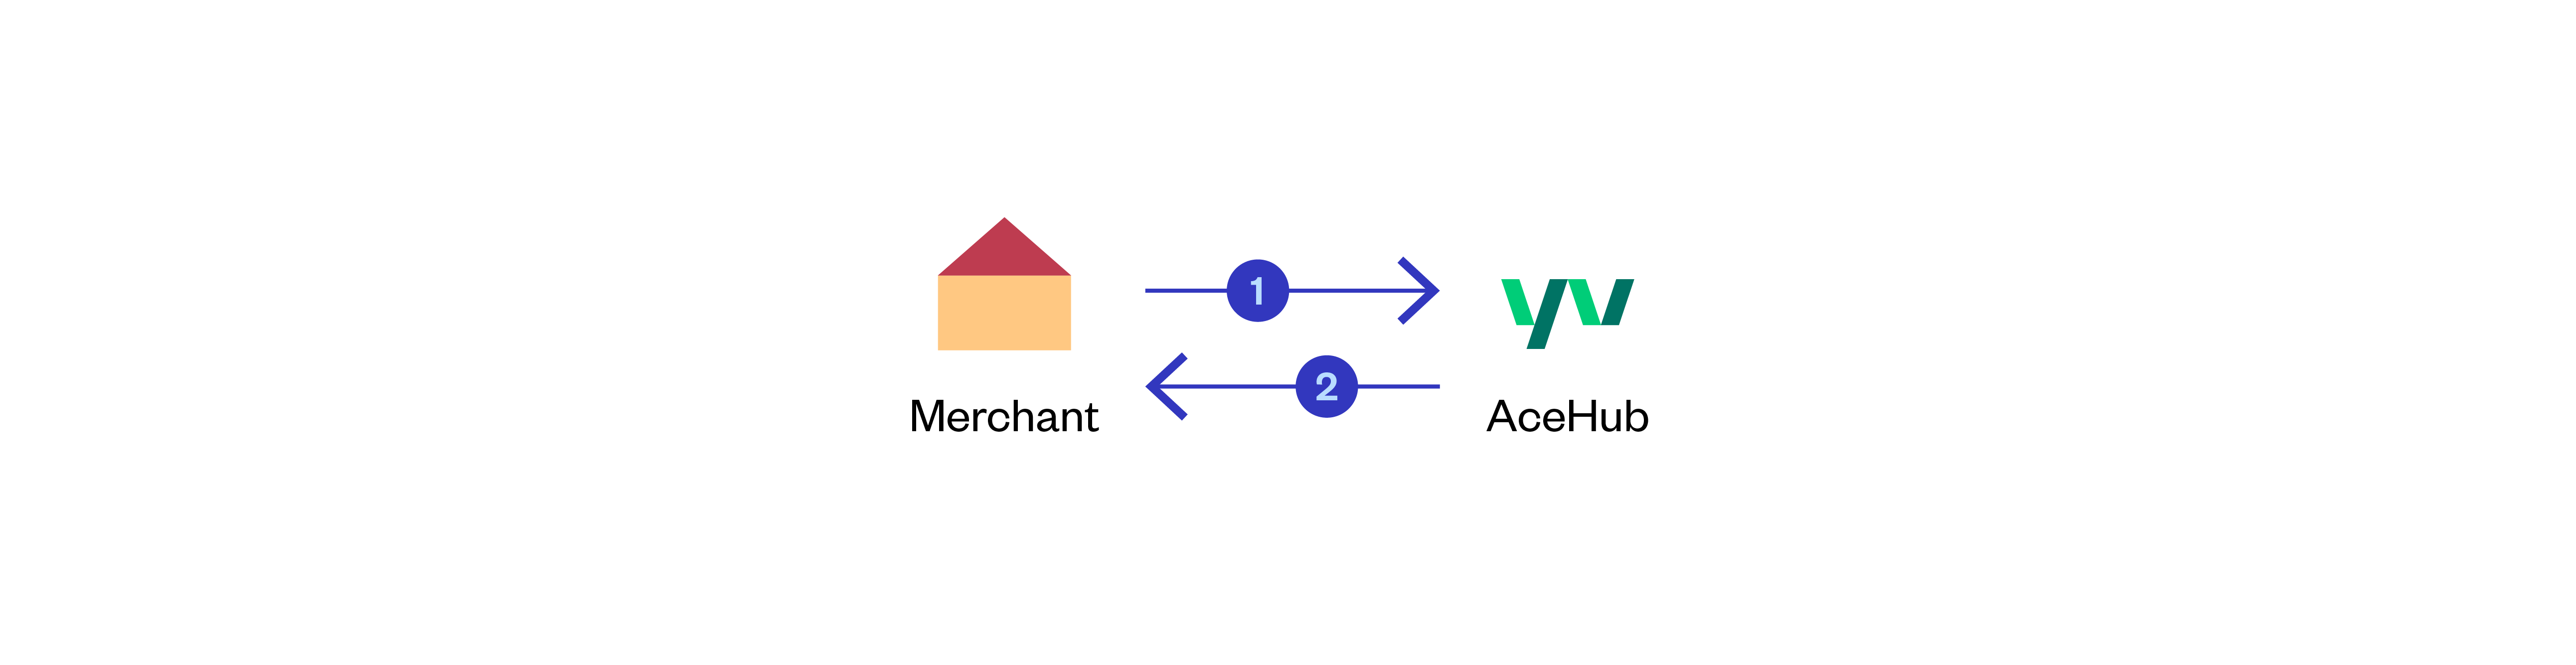 AceHub - Get Payment Flow